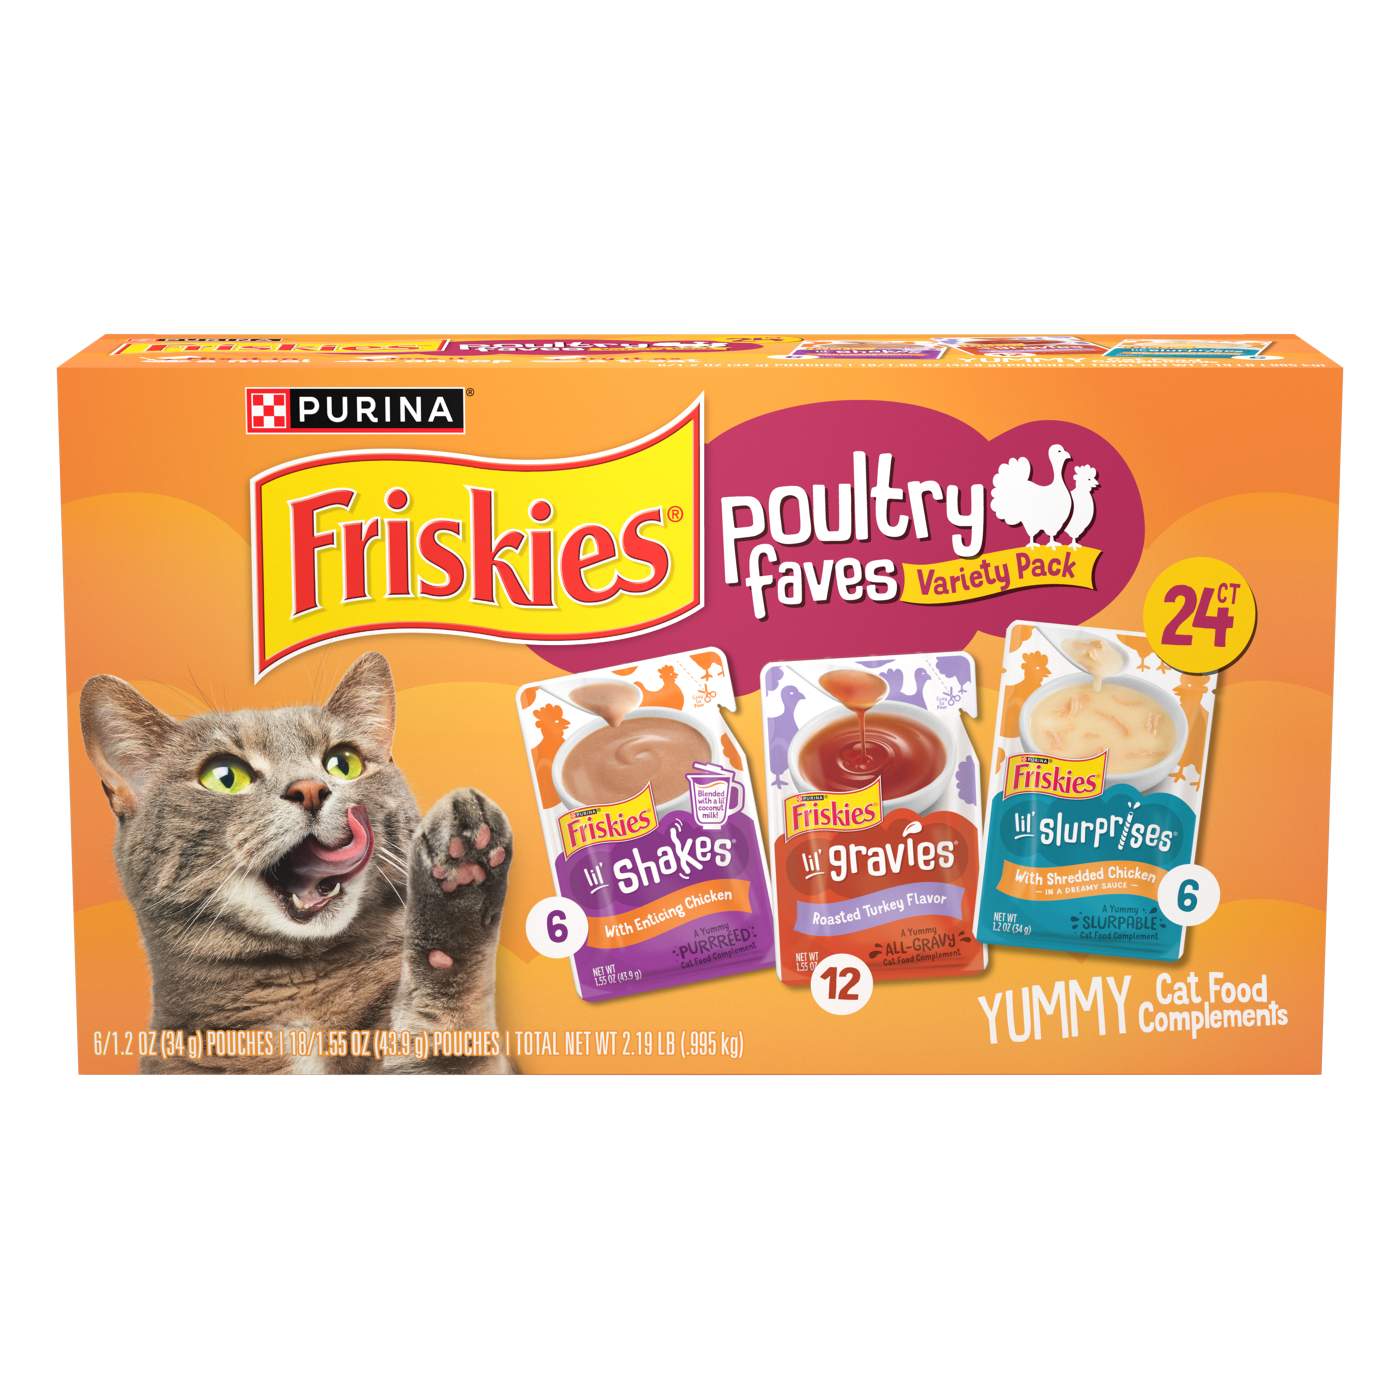 Friskies Wet Cat Treats Variety Pack, Poultry Faves; image 1 of 8